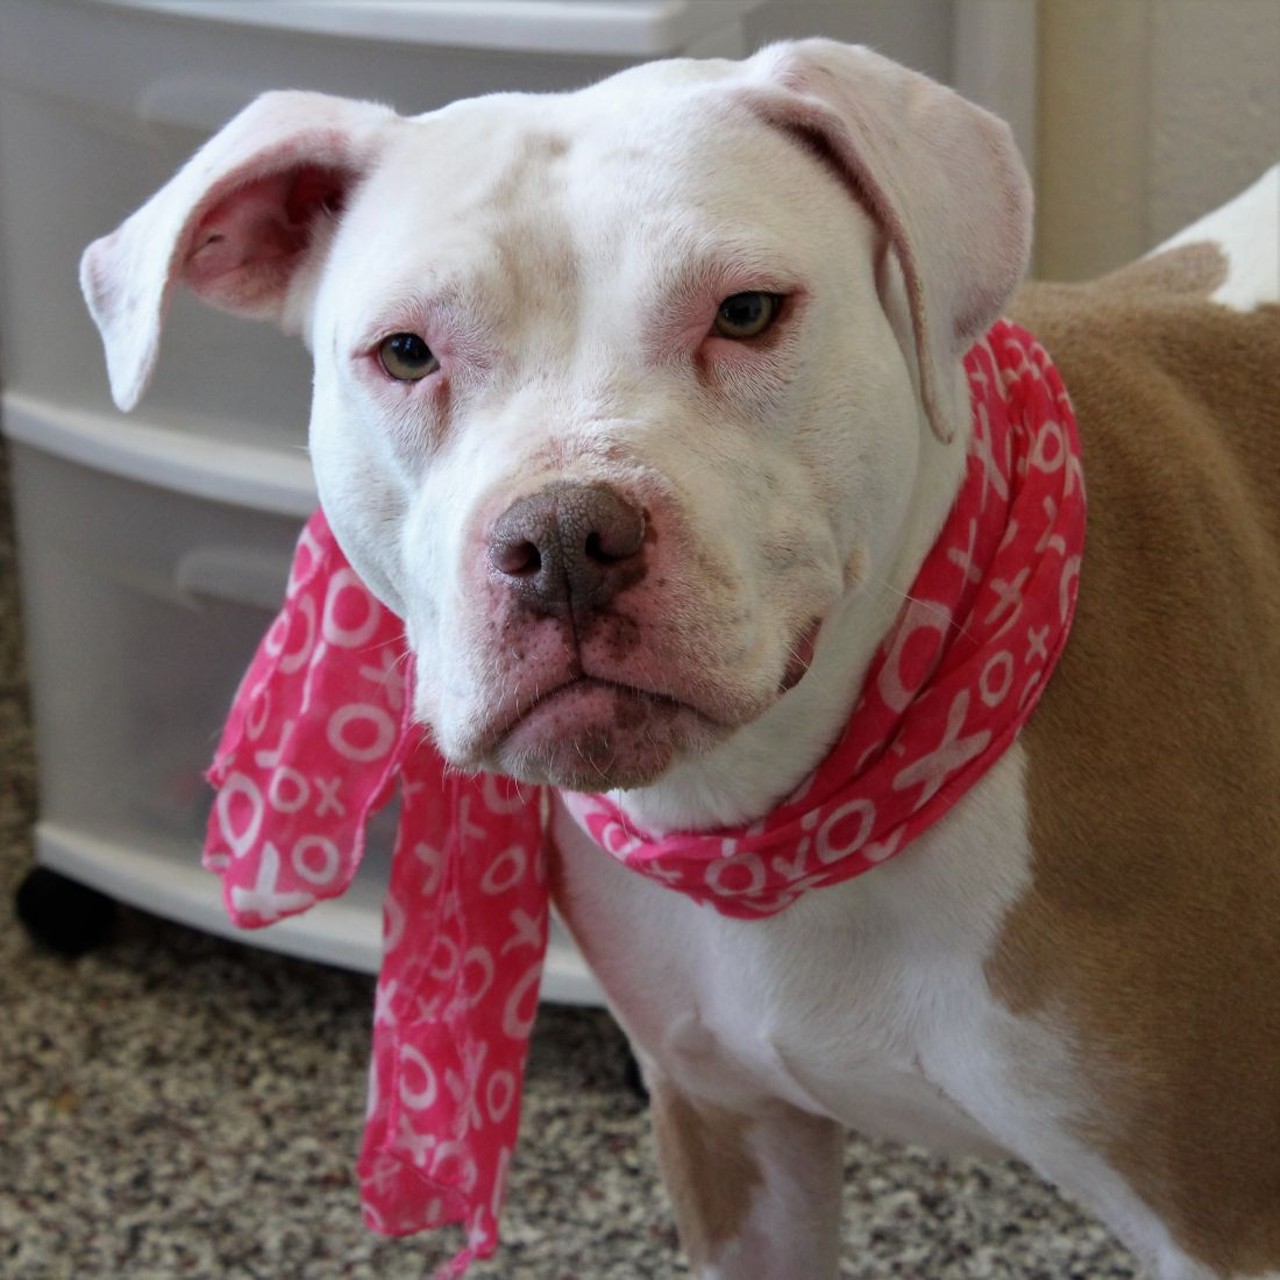 NAME: Lilith
GENDER: Female
BREED: Pit Bull Terrier
AGE: 2 years, 8 months
WEIGHT: 46 pounds
SPECIAL CONSIDERATIONS: None
REASON I CAME TO MHS: Homeless and injured in Detroit
LOCATION: Mackey Center for Animal Care
ID NUMBER: 861808
DETAILS: Click here